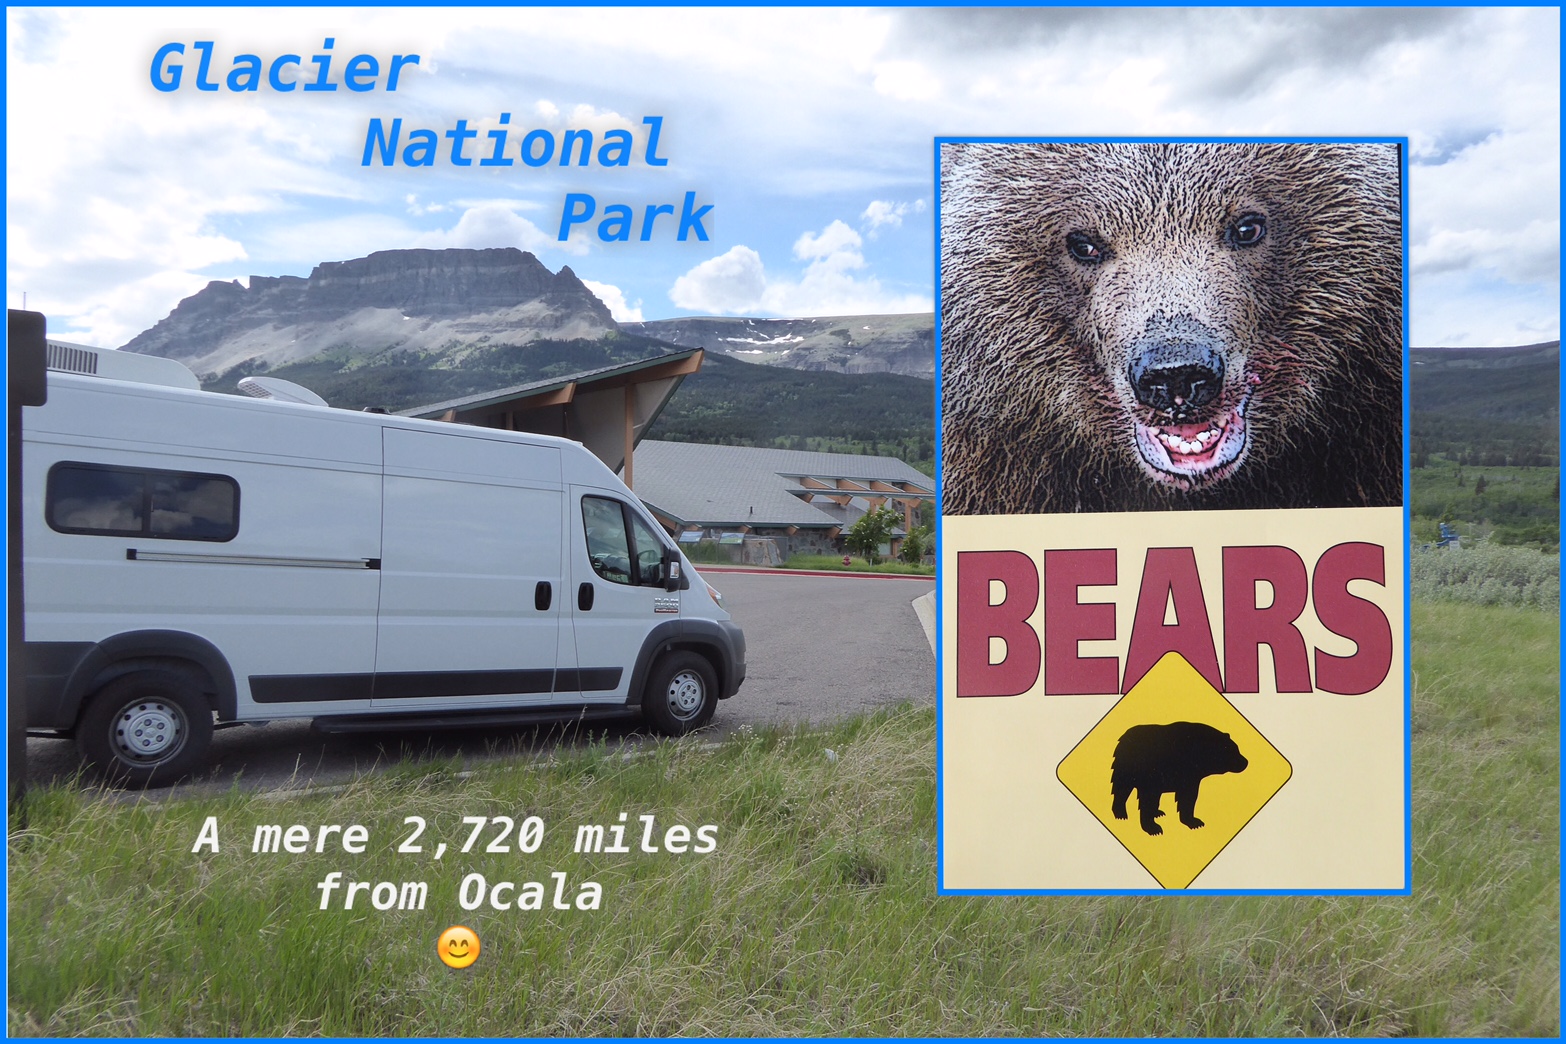 This was a picture of an RV with a bear photoshopped next to it. 